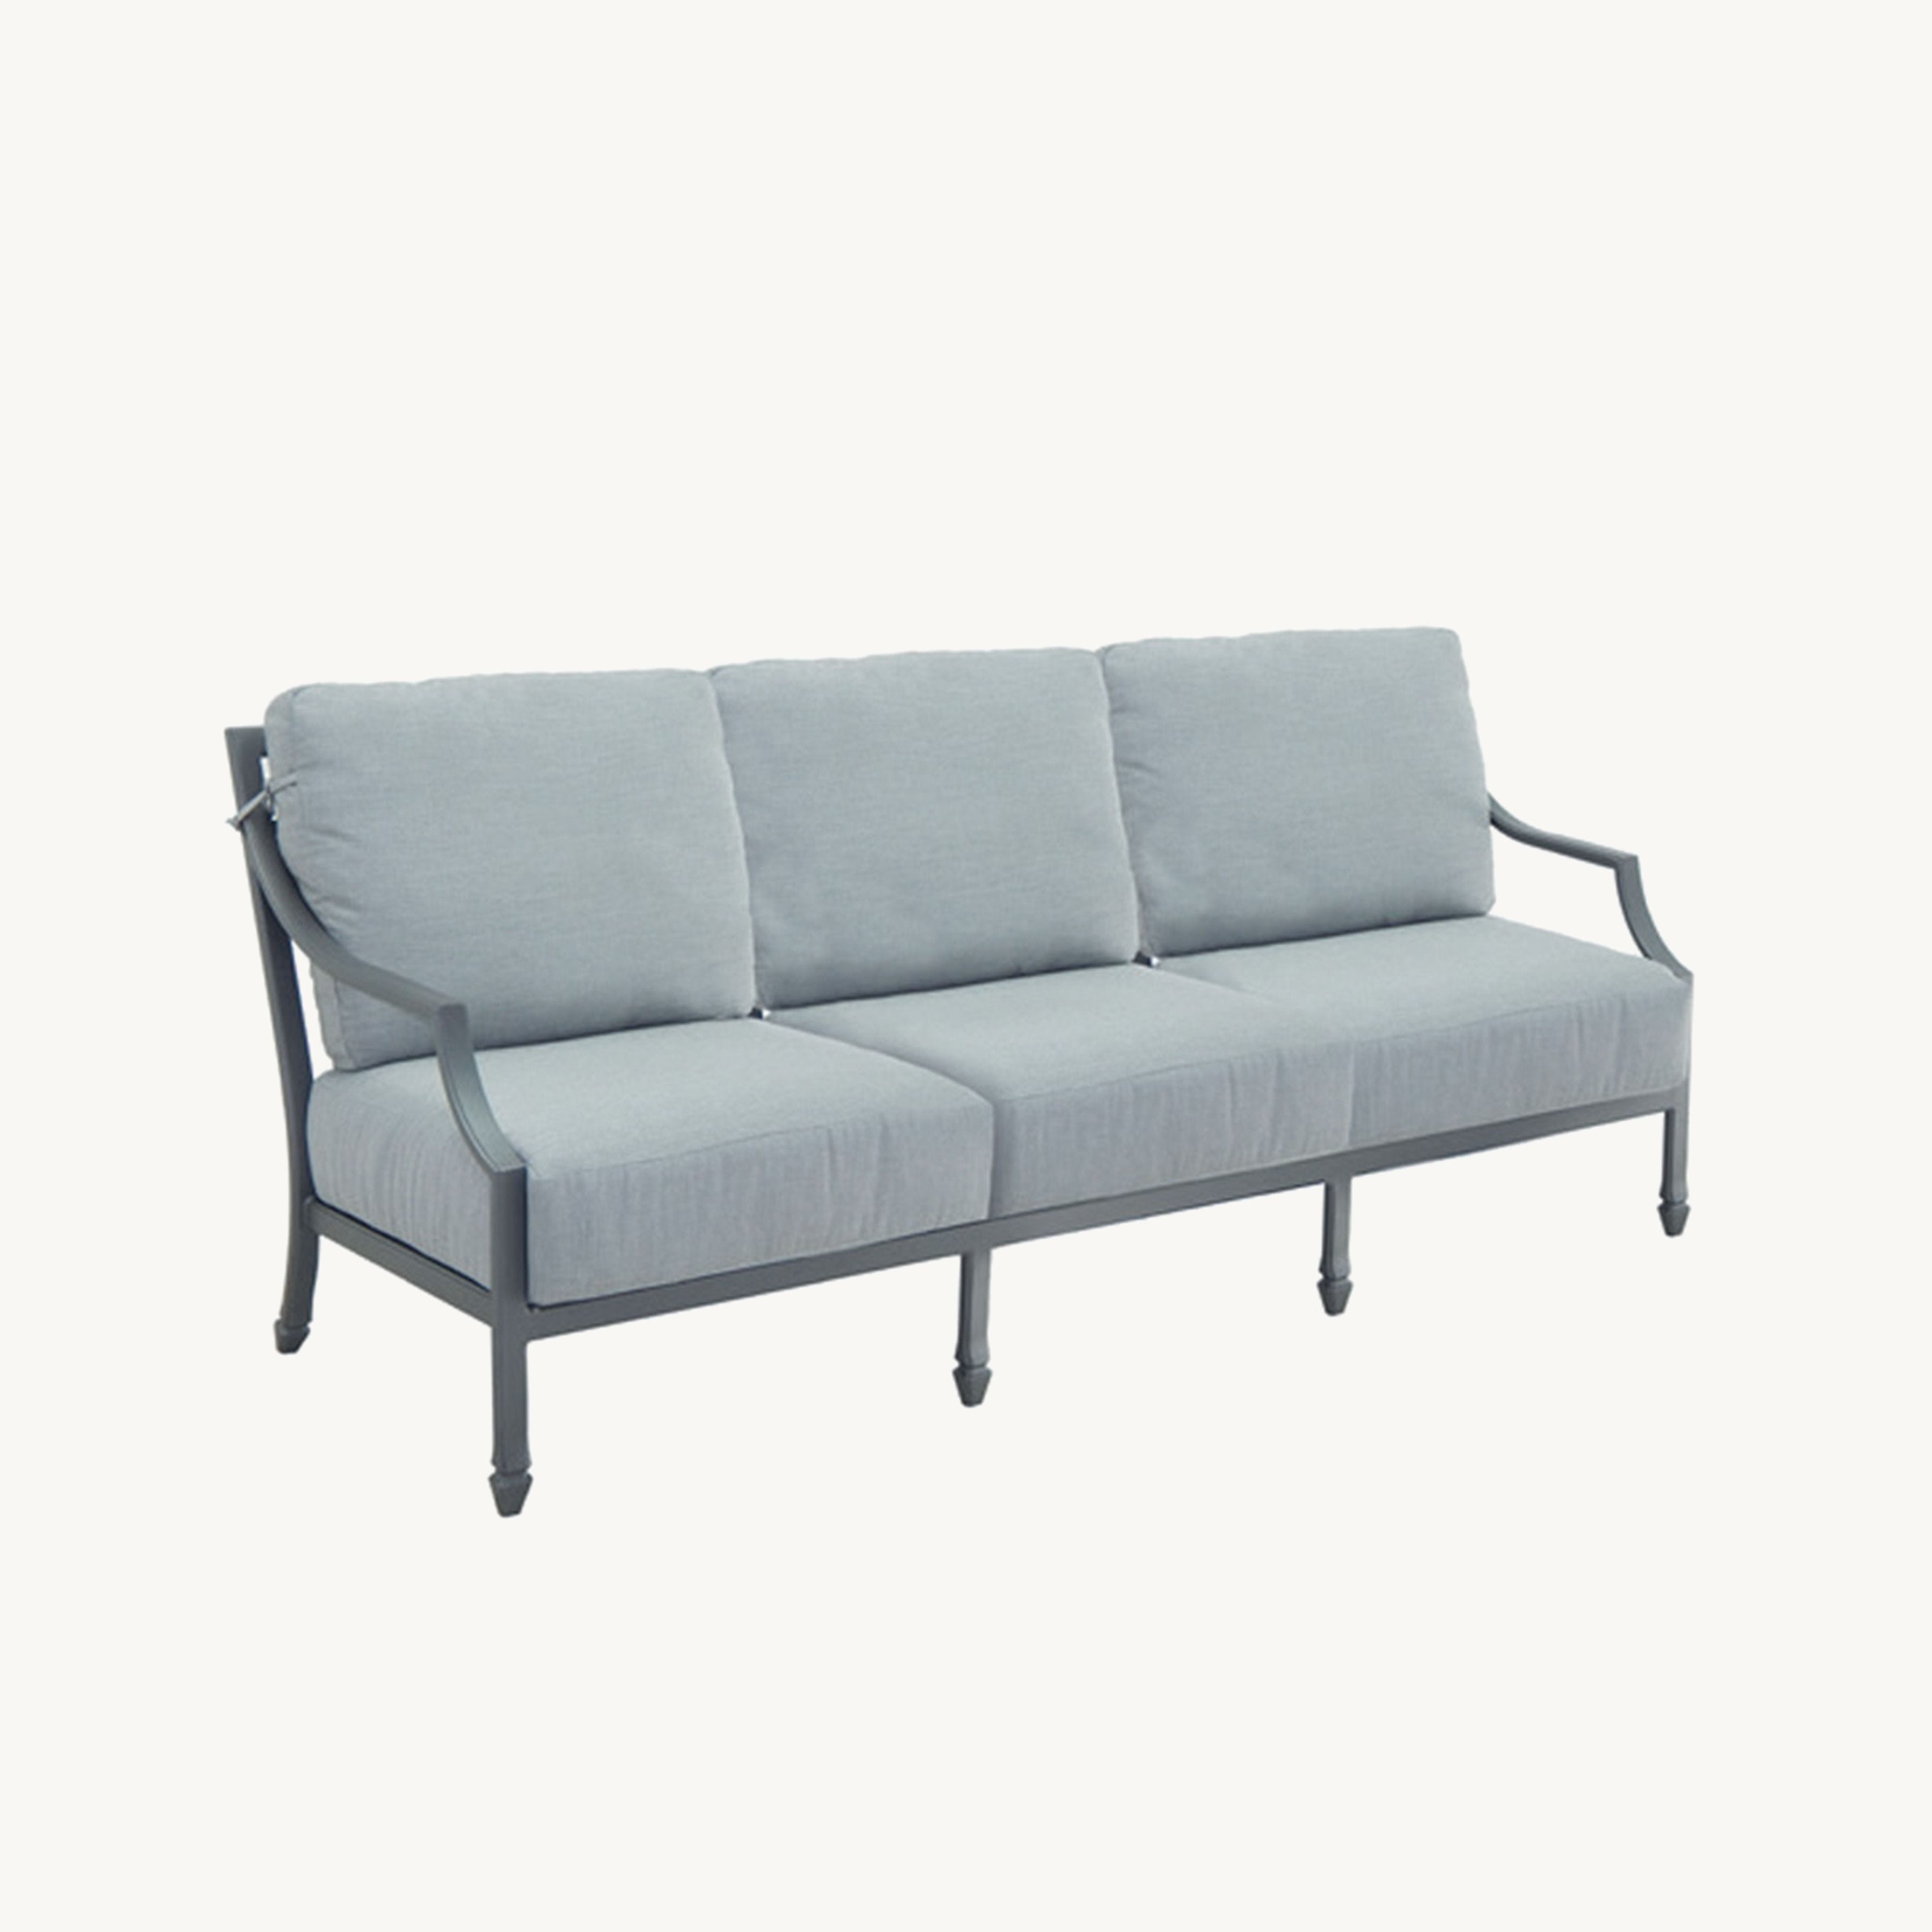 Lancaster Deep Seating Set By Castelle